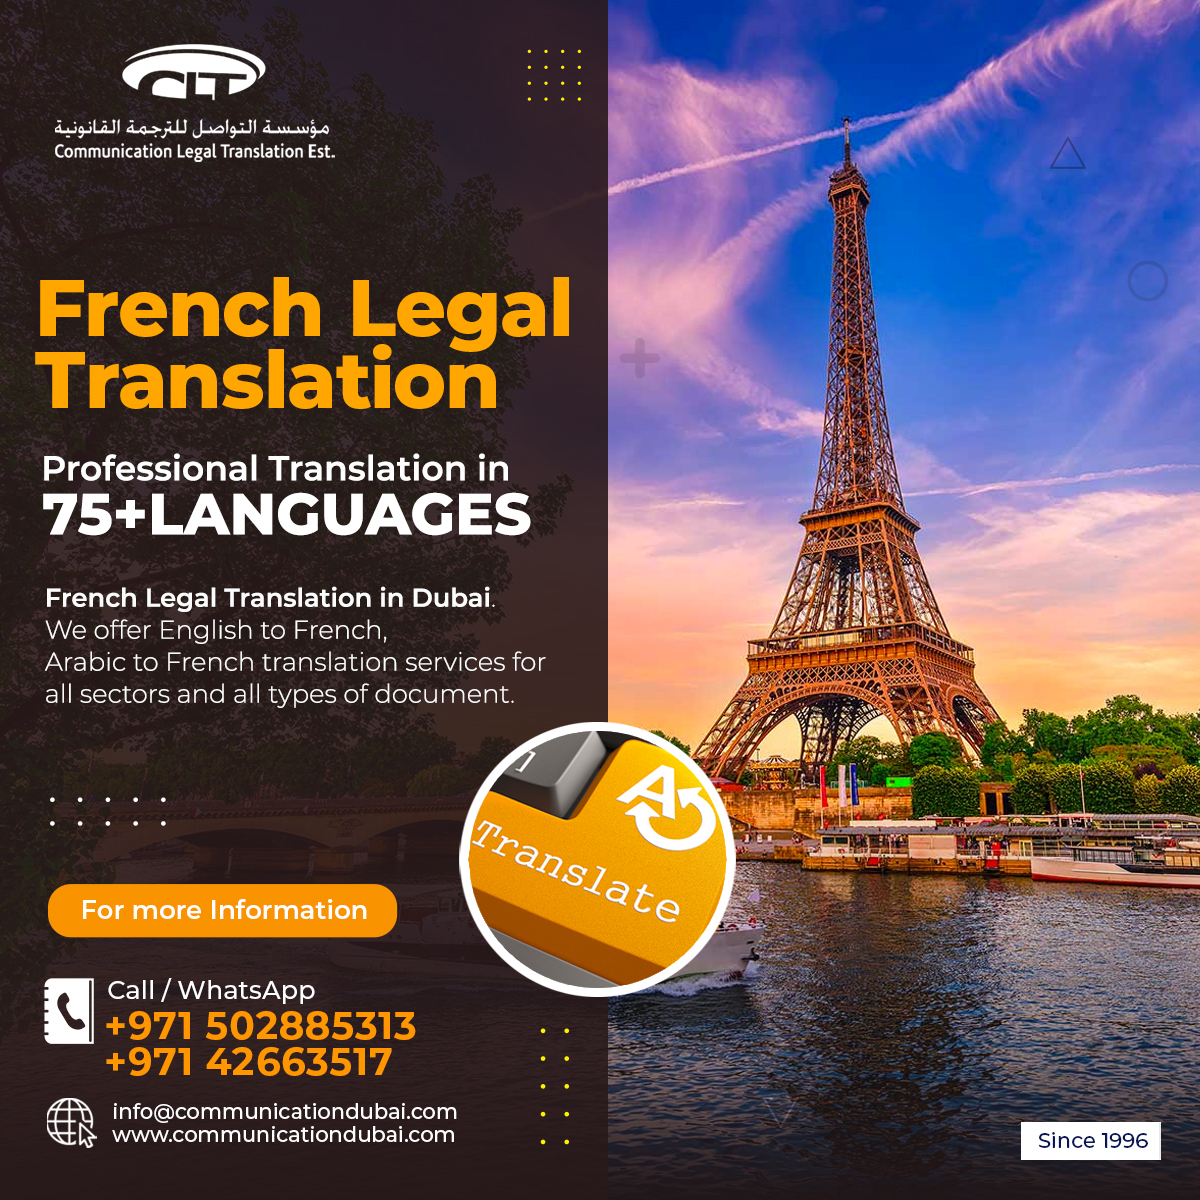 communicationdubai.com/english-to-fre…
Call / WhatsApp: +971 502885313

 #frenchclass #studyfrench #frenchlearning #frenchlesson #learnfrenchonline #franc #frenchteacher #francais #language #parlerfran #languefran #s #frenchonline #francophile #delf
'